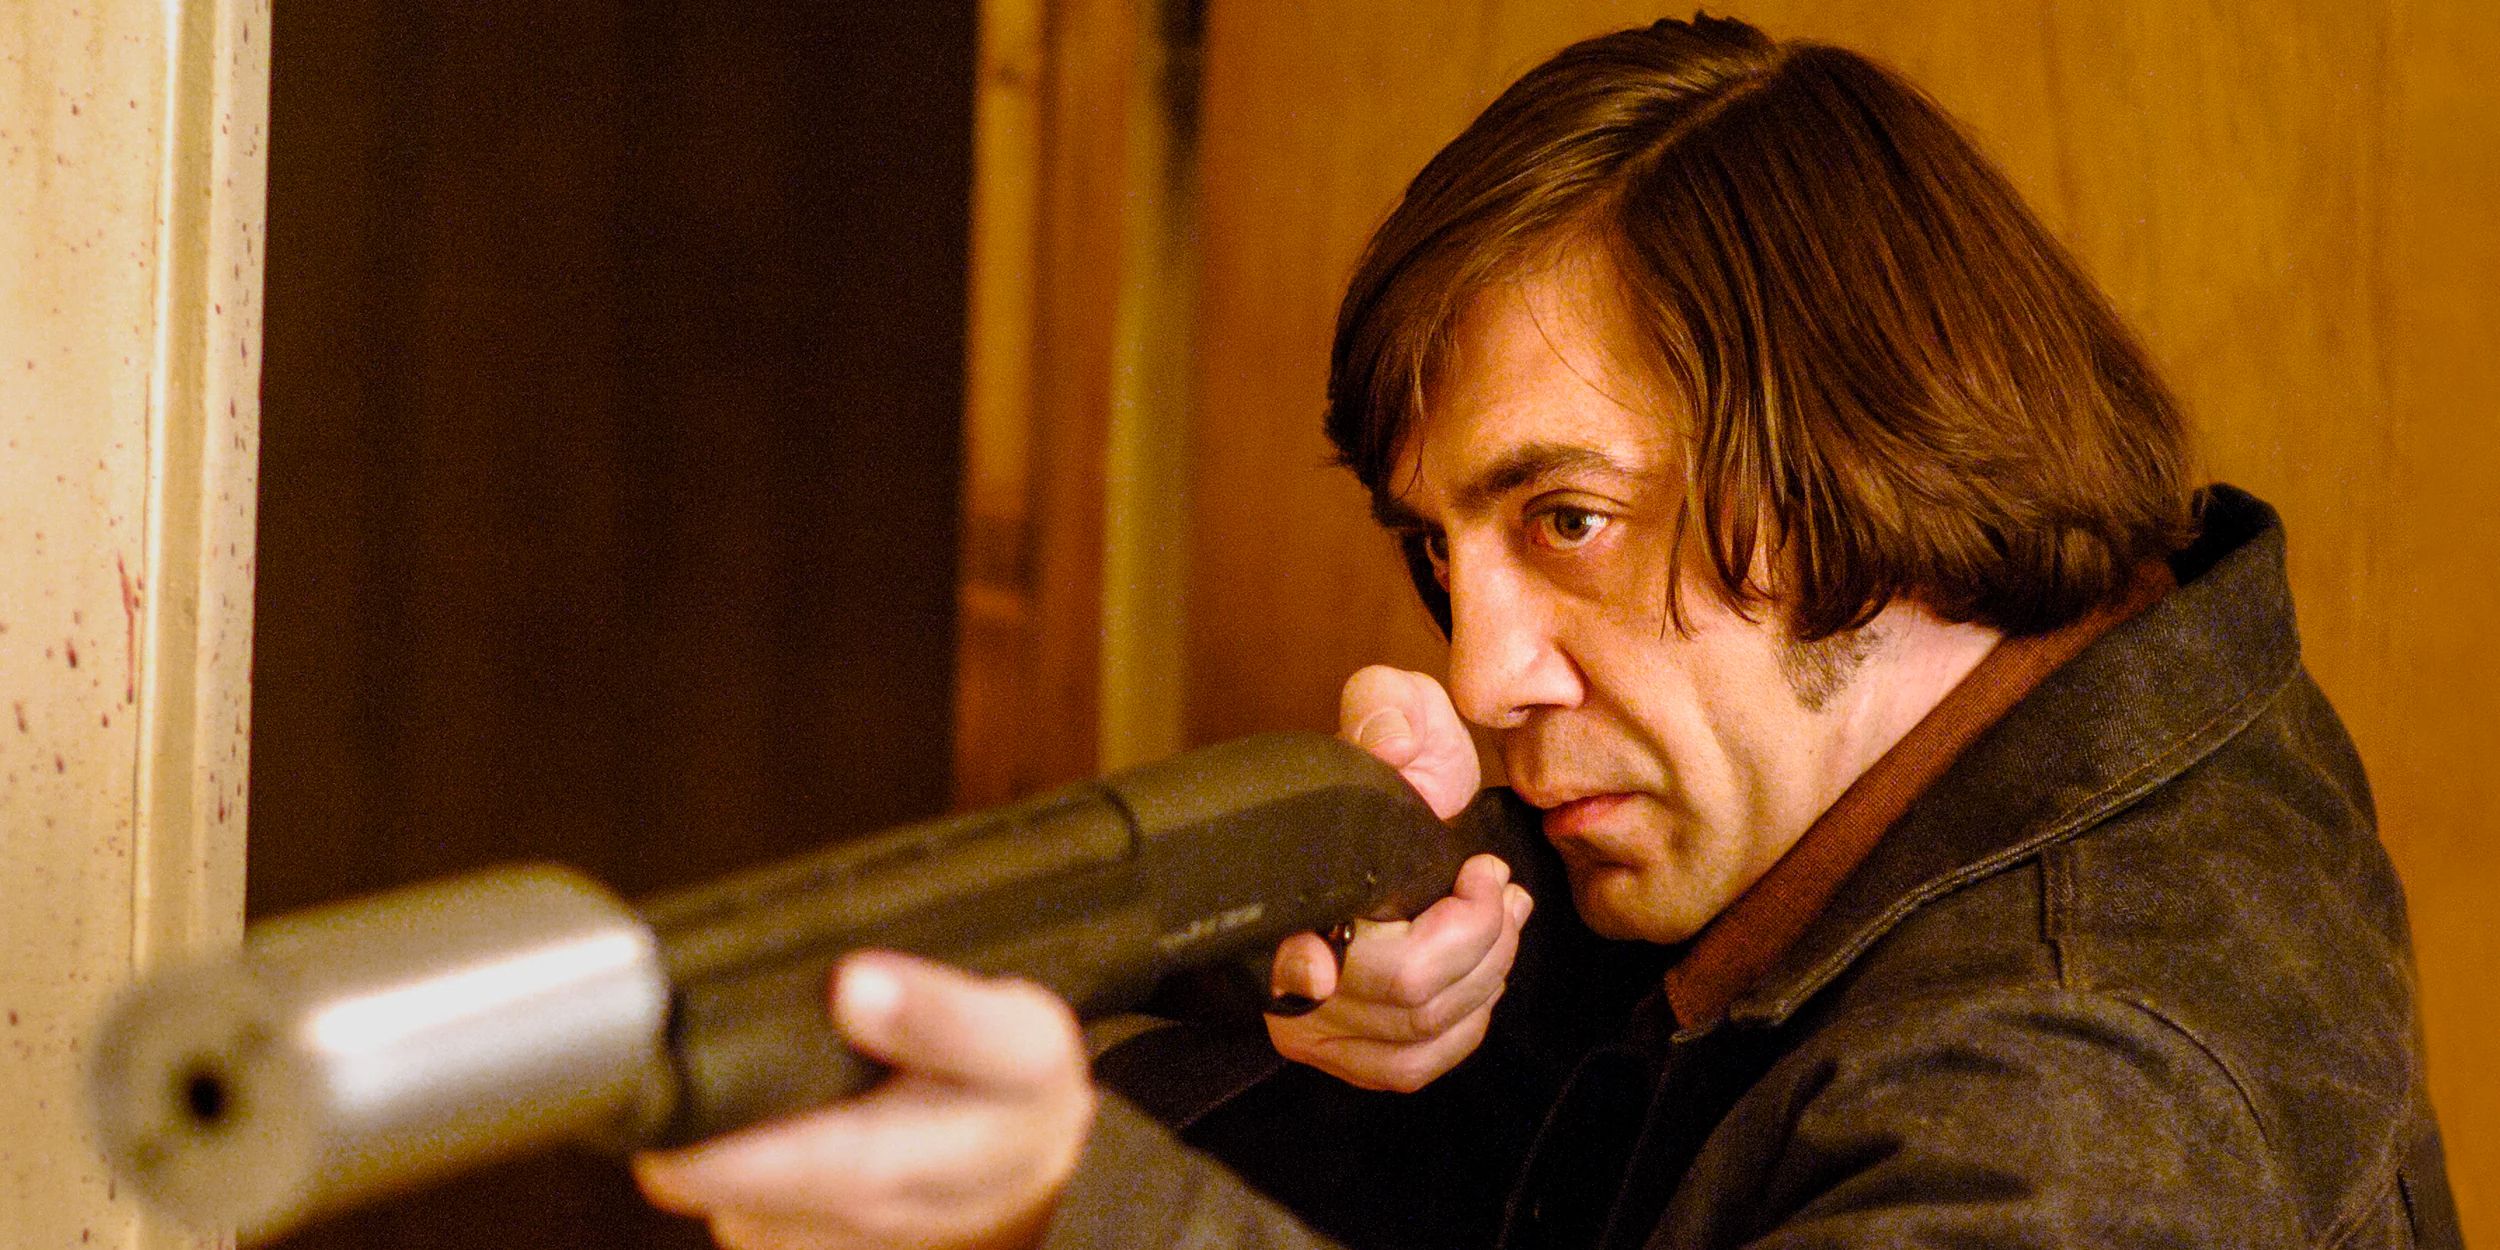 Javier Bardem as Anton Chigurh holding a shotgun in No Country For Old Men